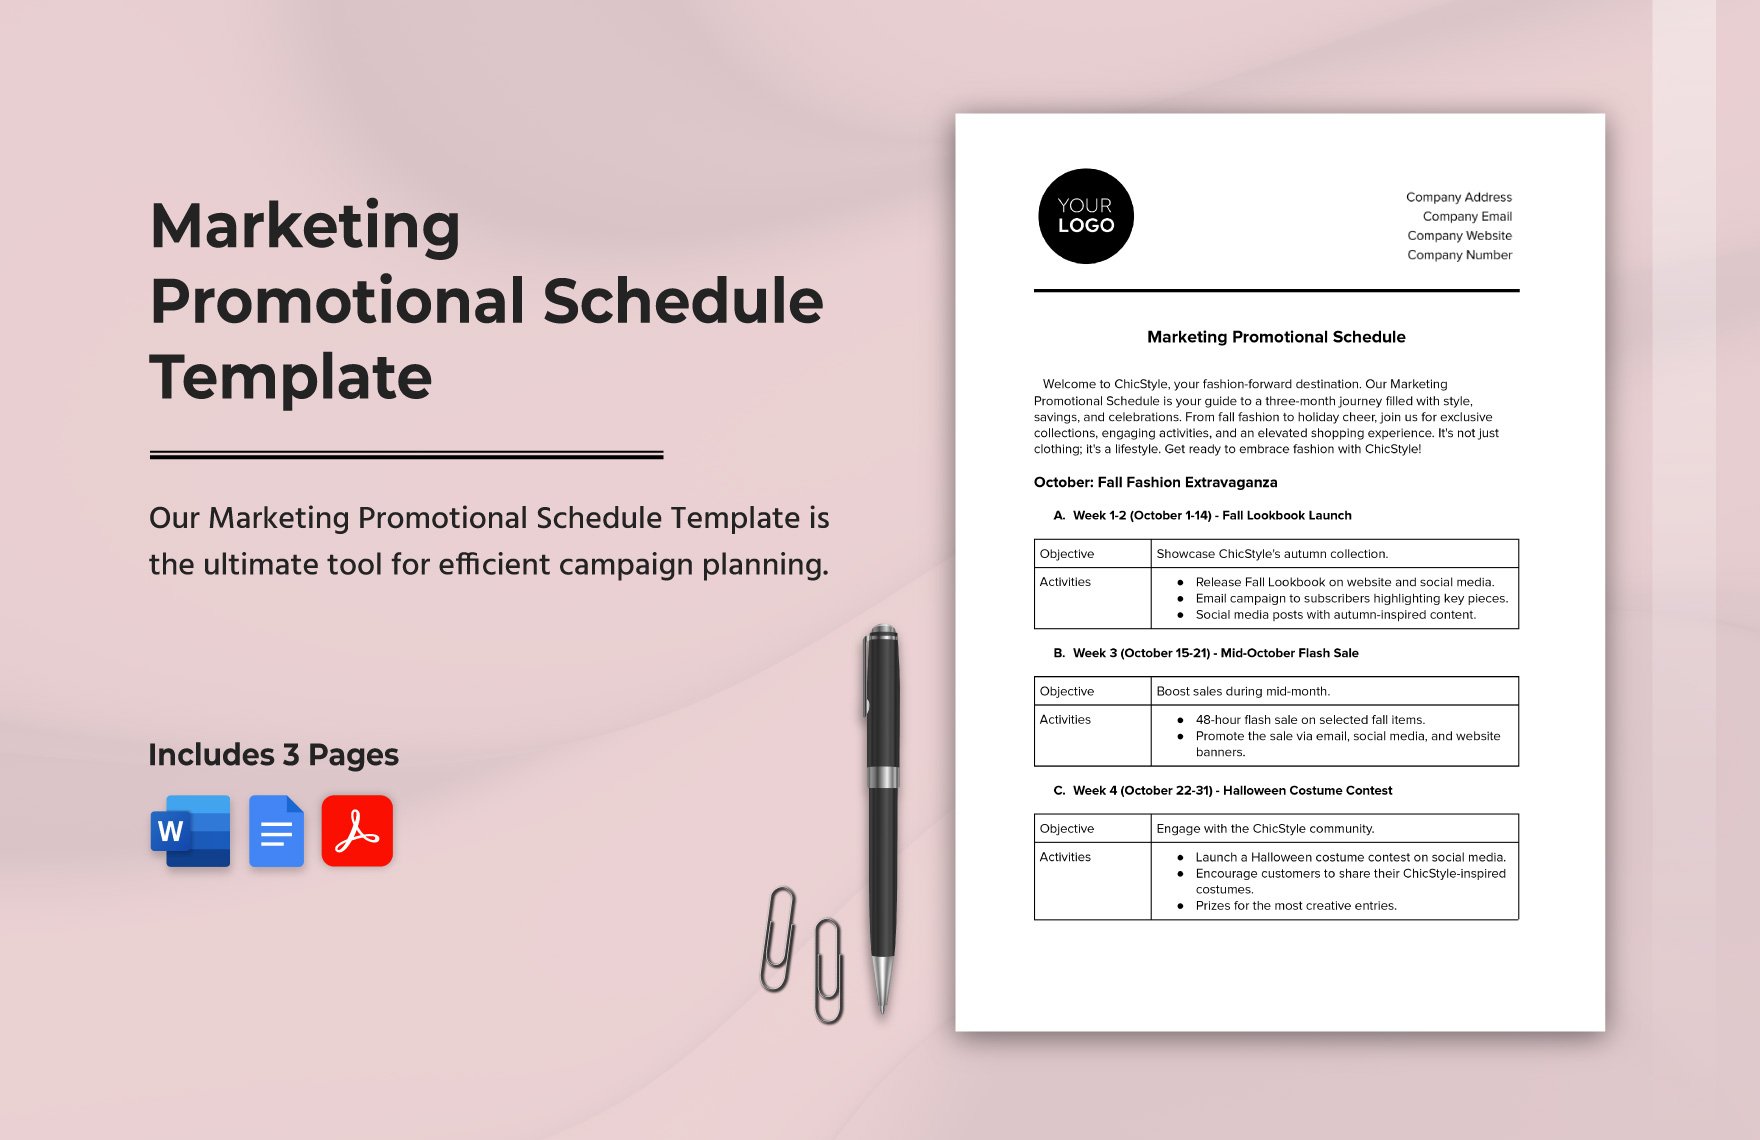 Marketing Promotional Schedule Template